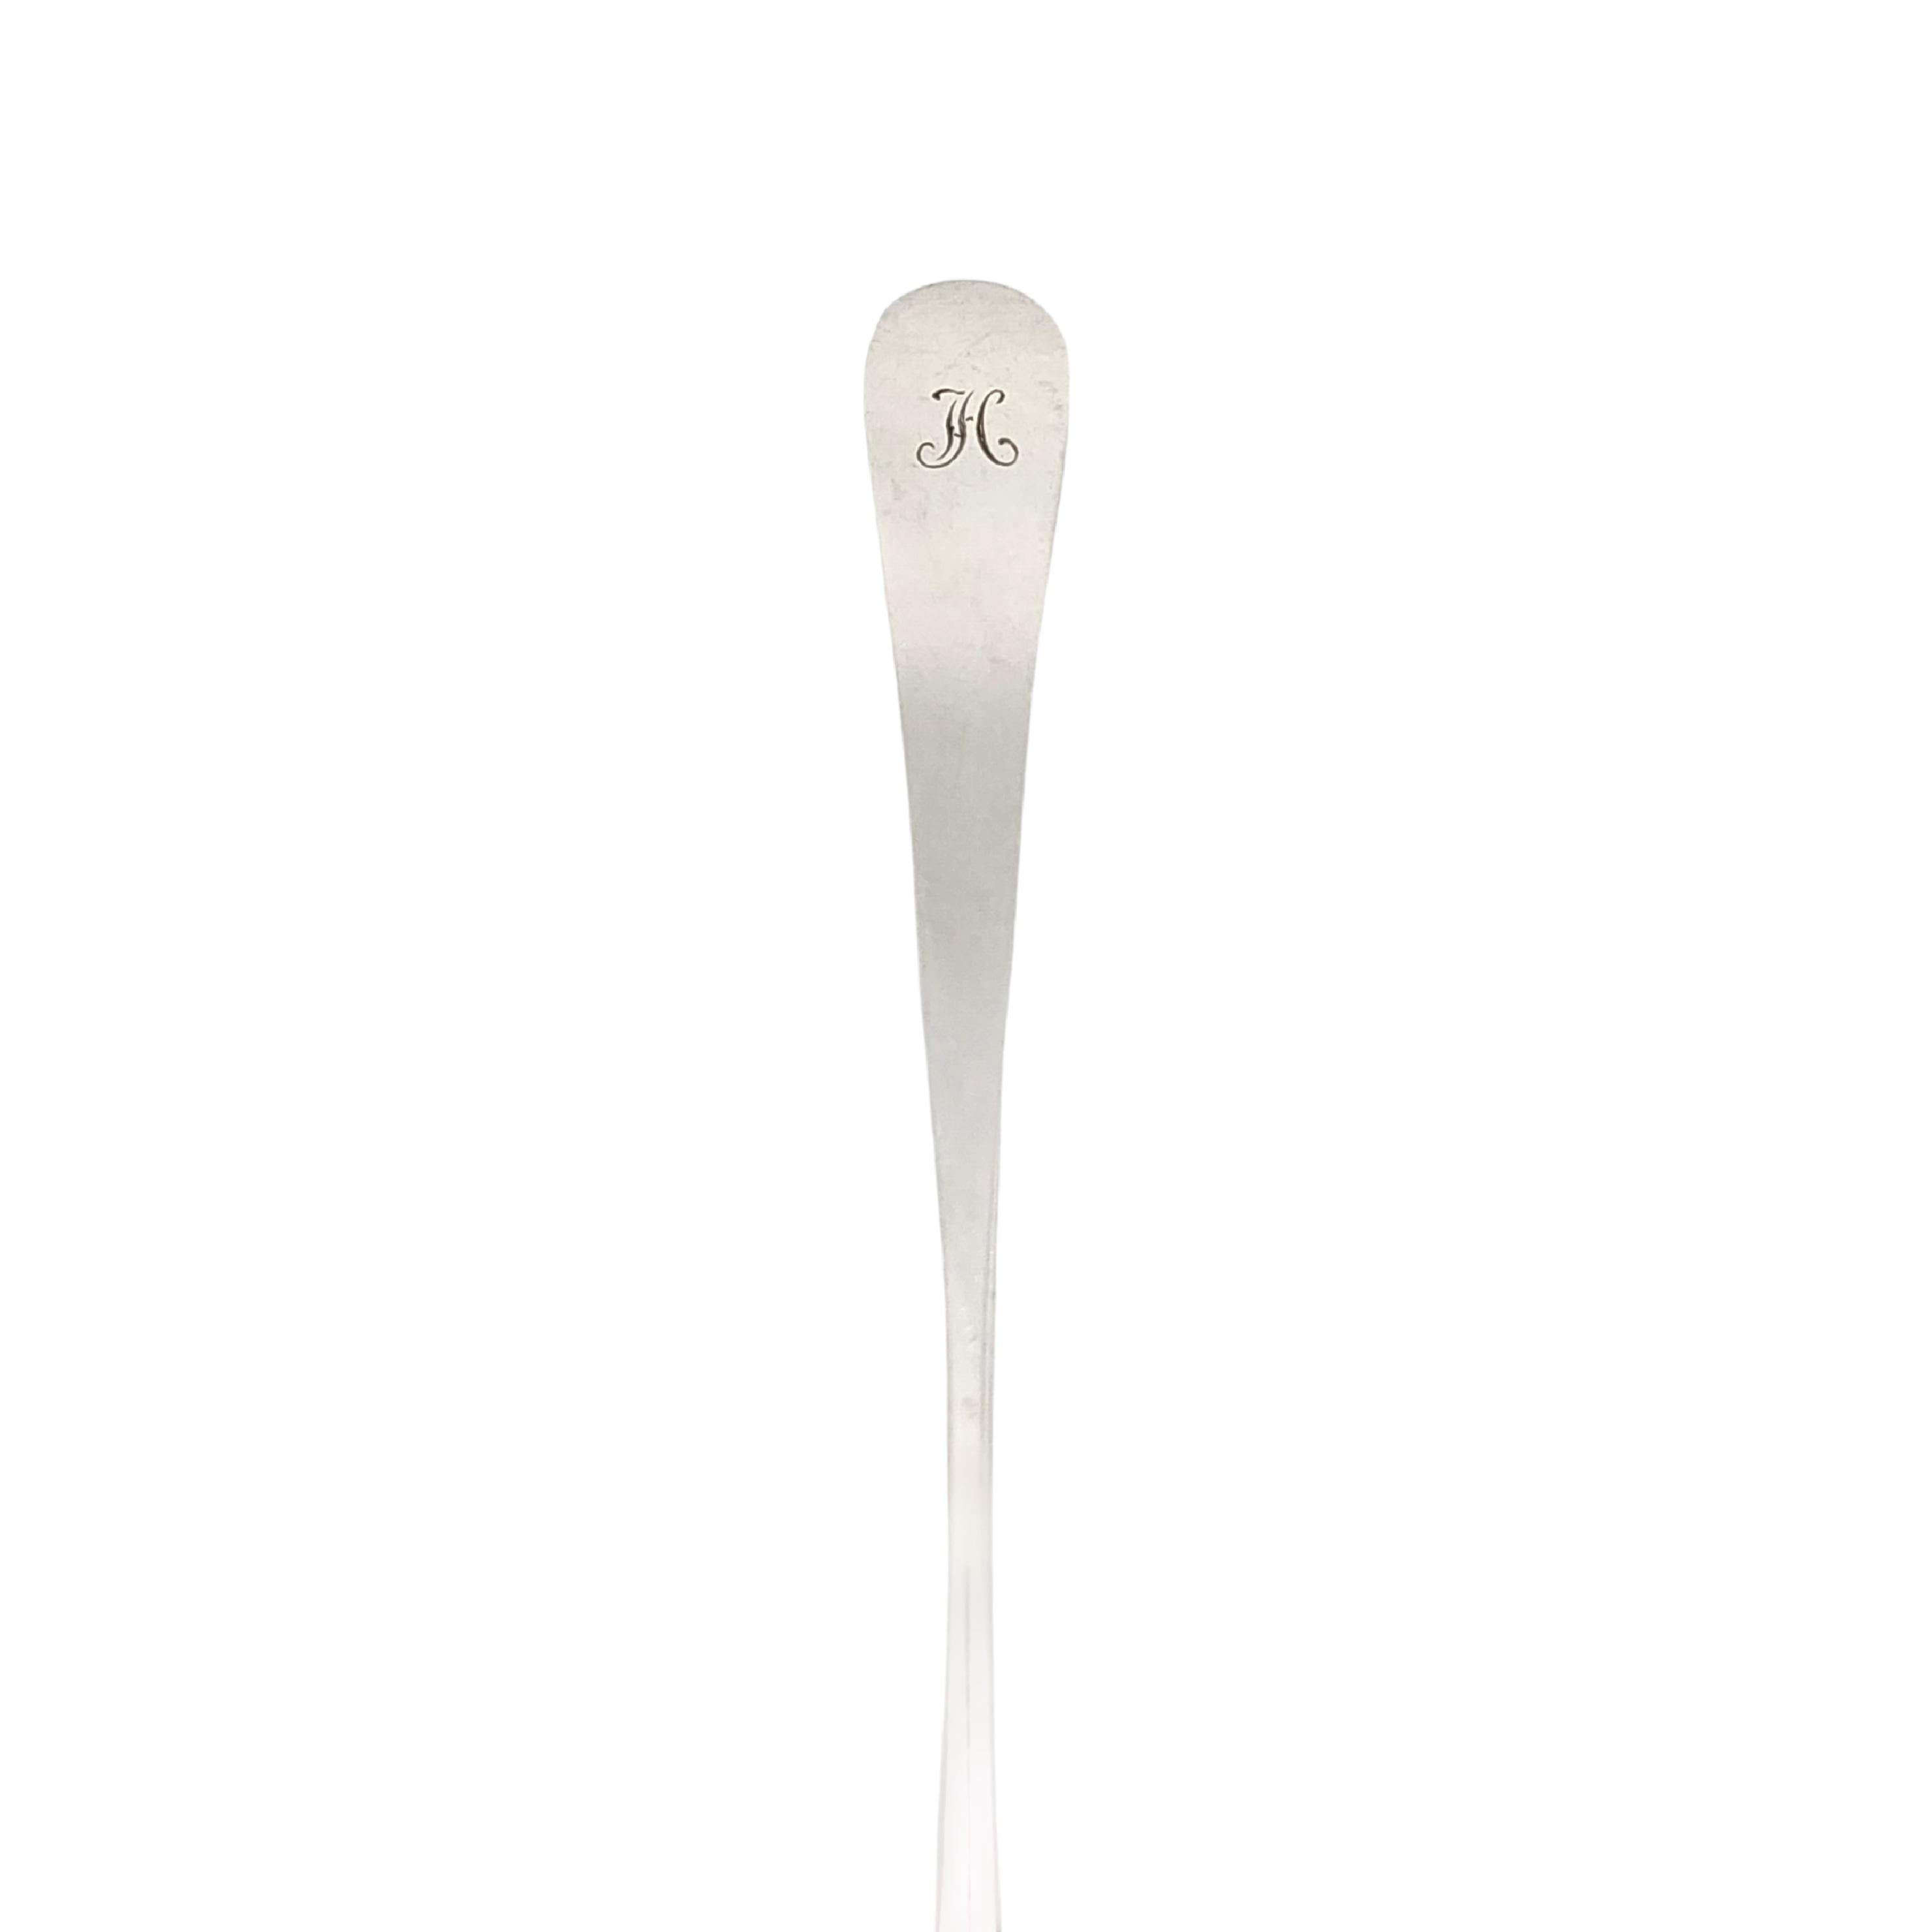 Tiffany & Co Sterling Silver Reproduction Edinborough Ladle with Monogram 'C' For Sale 6